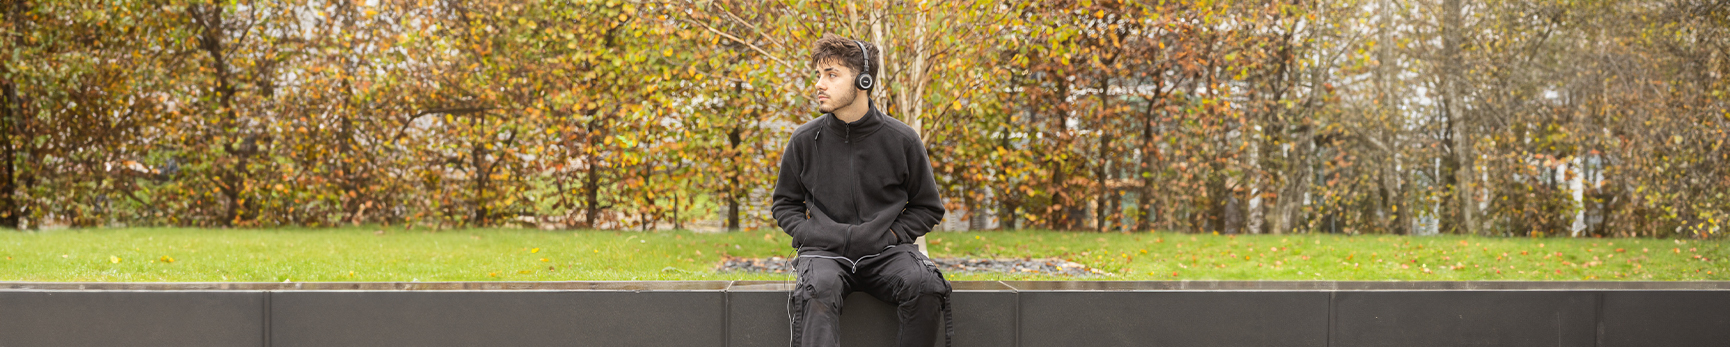 A young student wearing black clothes and headphones, sitting on a bench in front of autumn trees